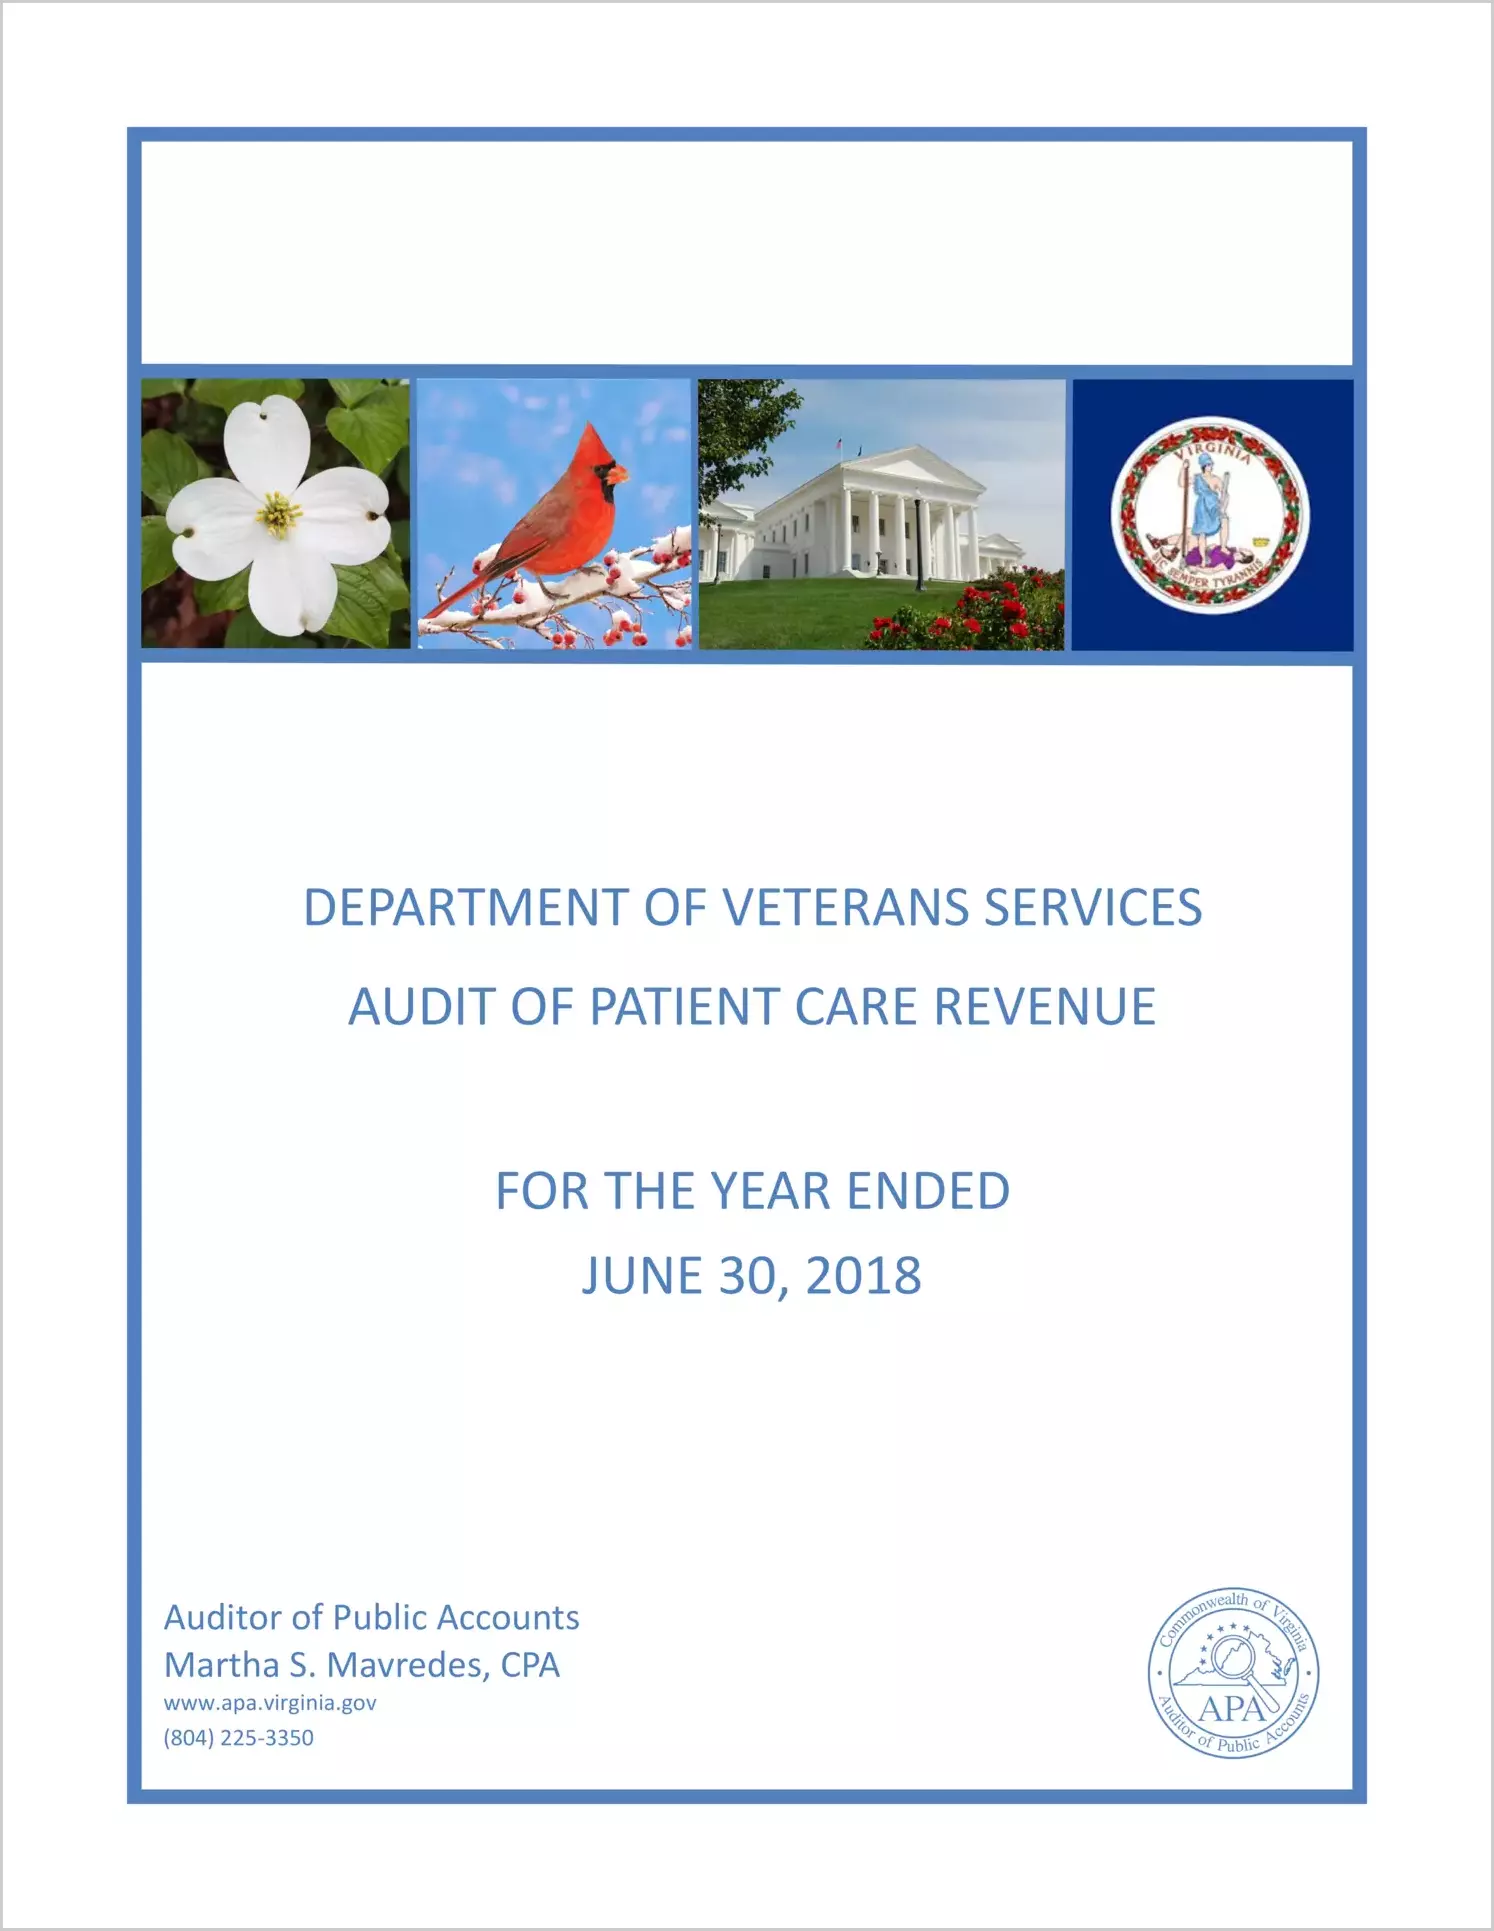 Department of Veterans Services Audit of Patient Care Revenue for the year ended June 30, 2018